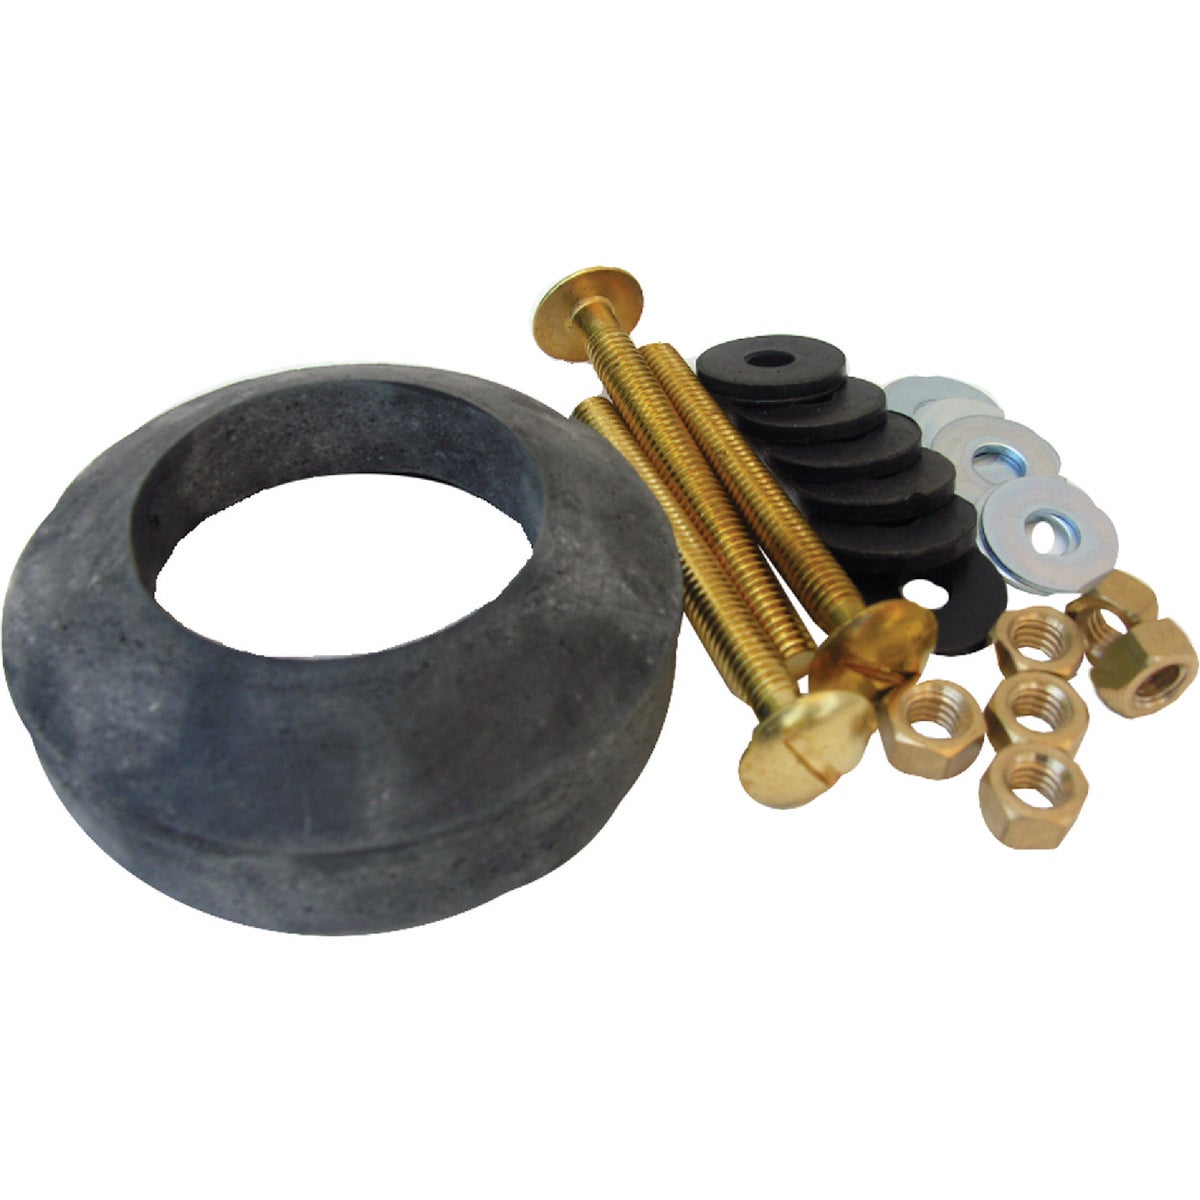 Lasco Norris & Mansfield Tank To Bowl Kit with Gasket 